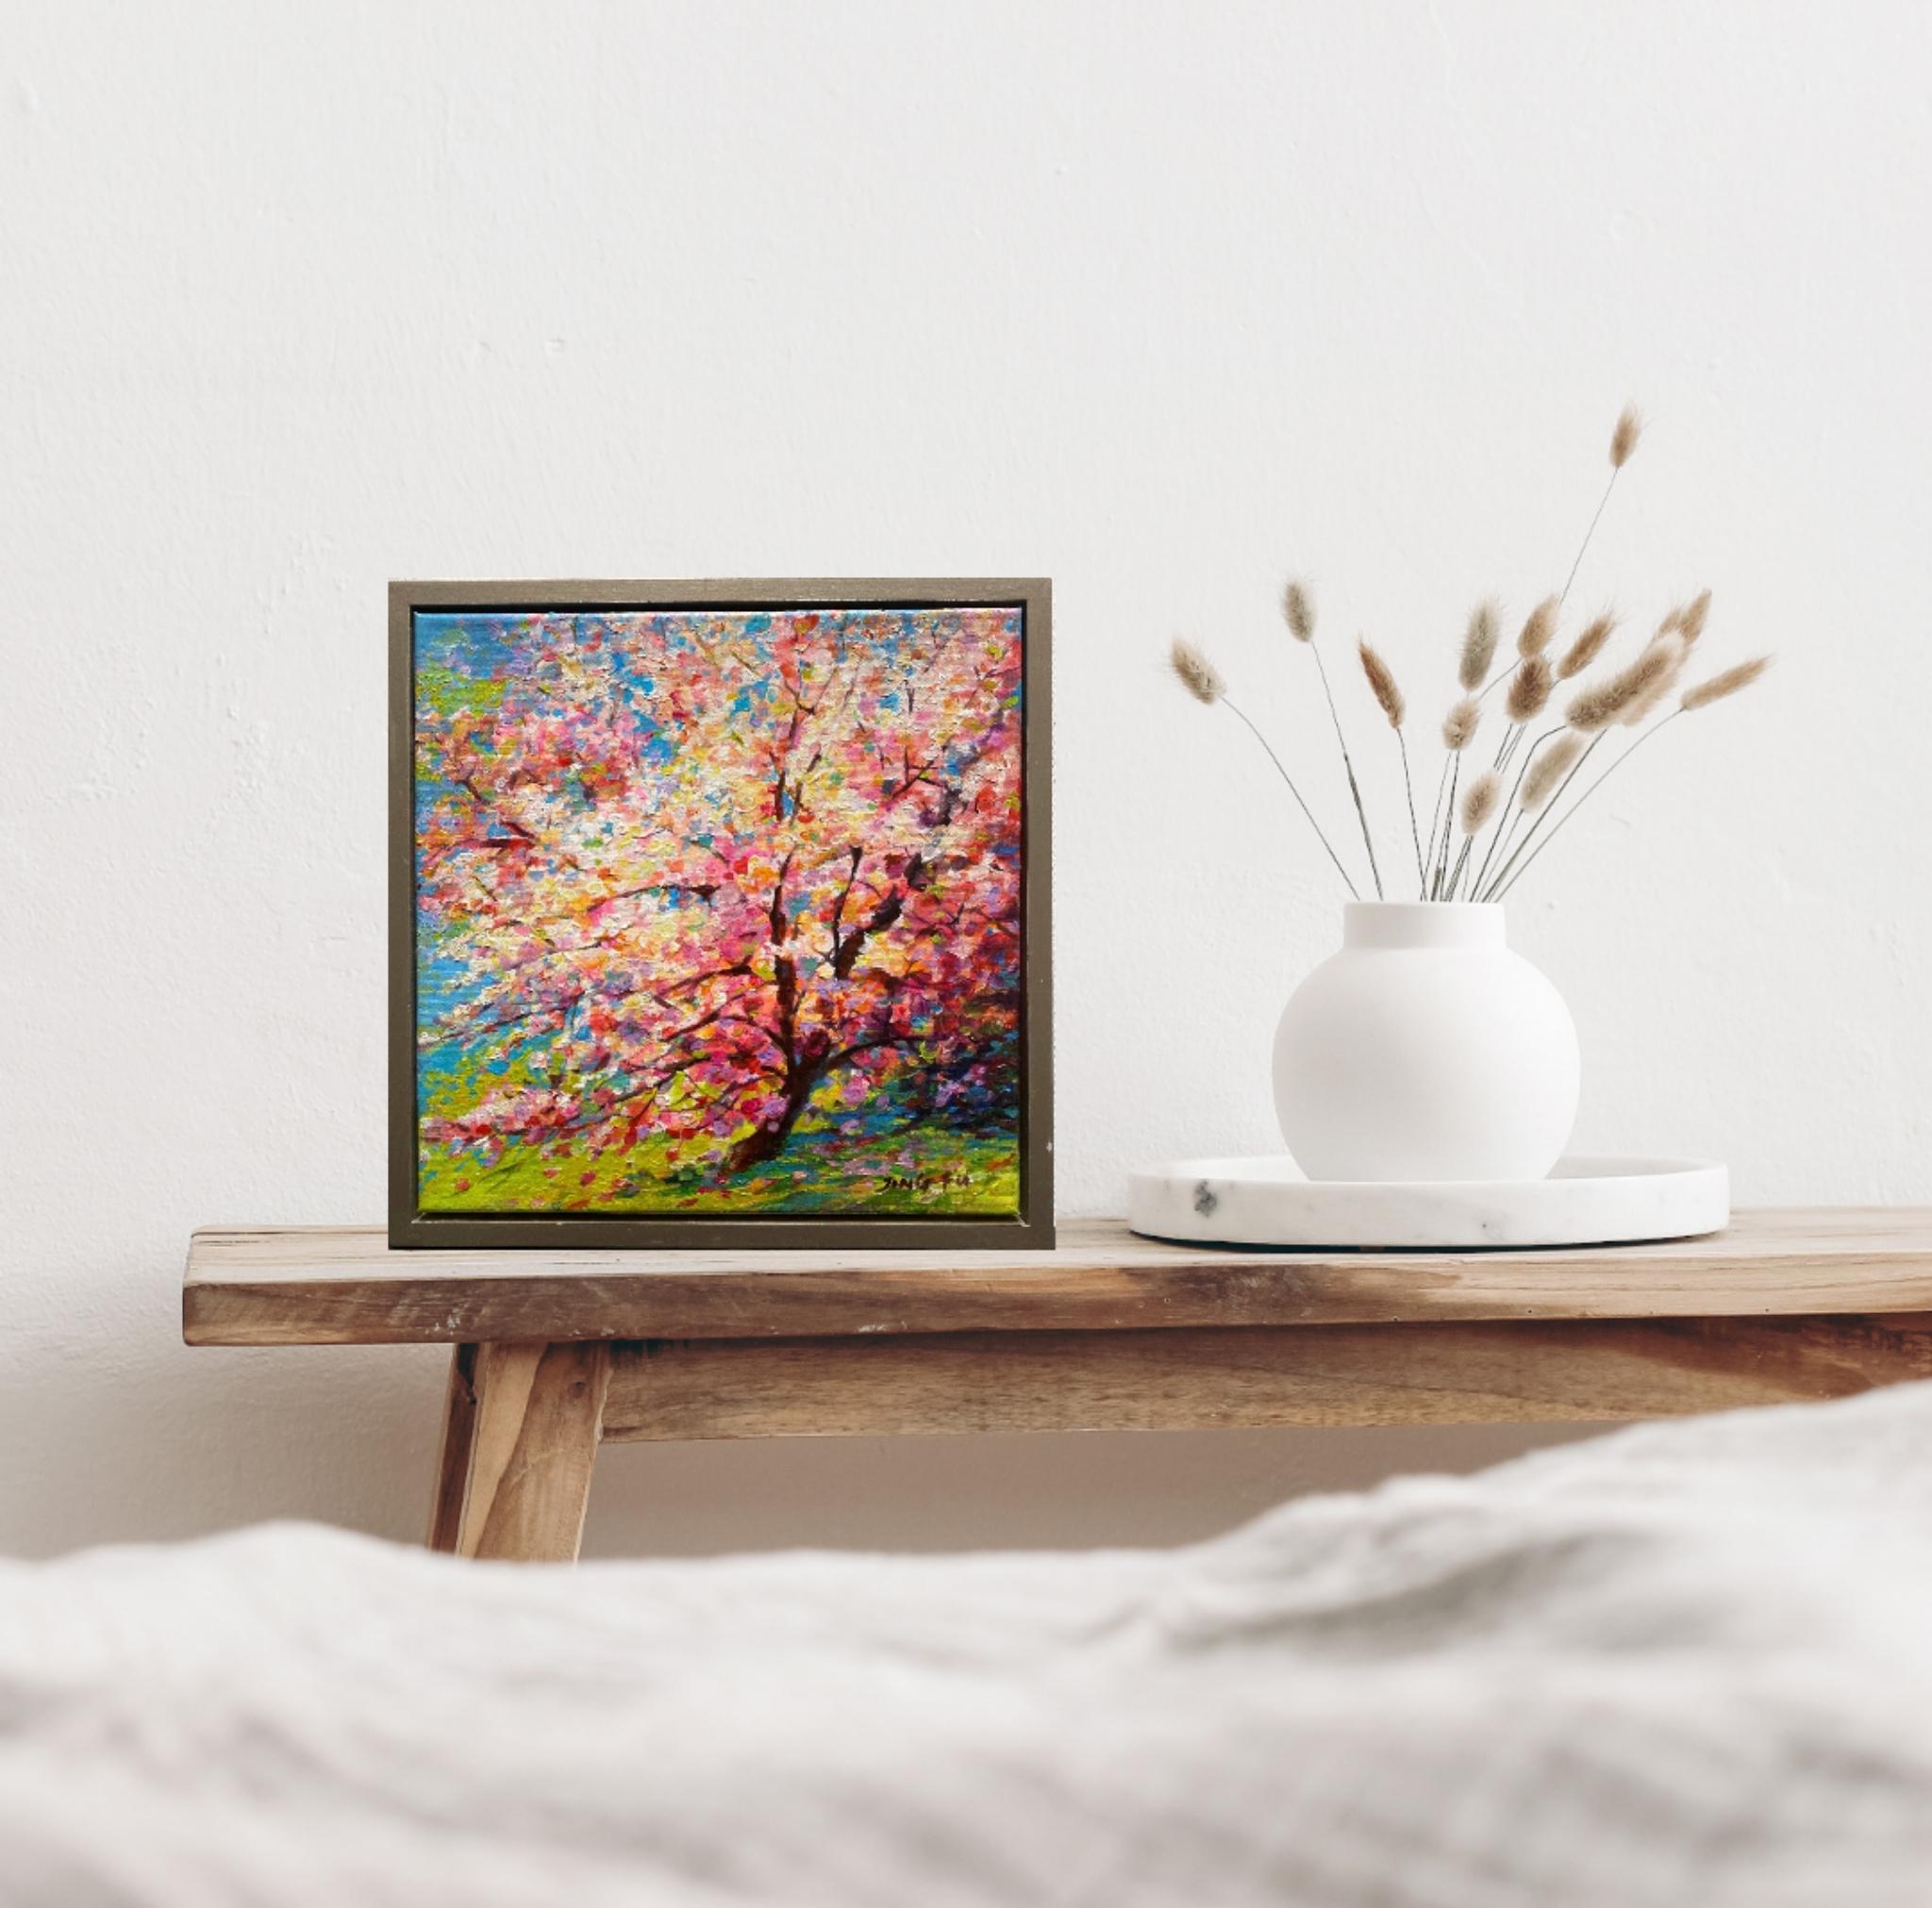 Spring on the way is a vibrant oil painting on canvas depicting a colorful blossoming tree in pink and yellow on a green lawn.
Comes framed and ready to hang.

